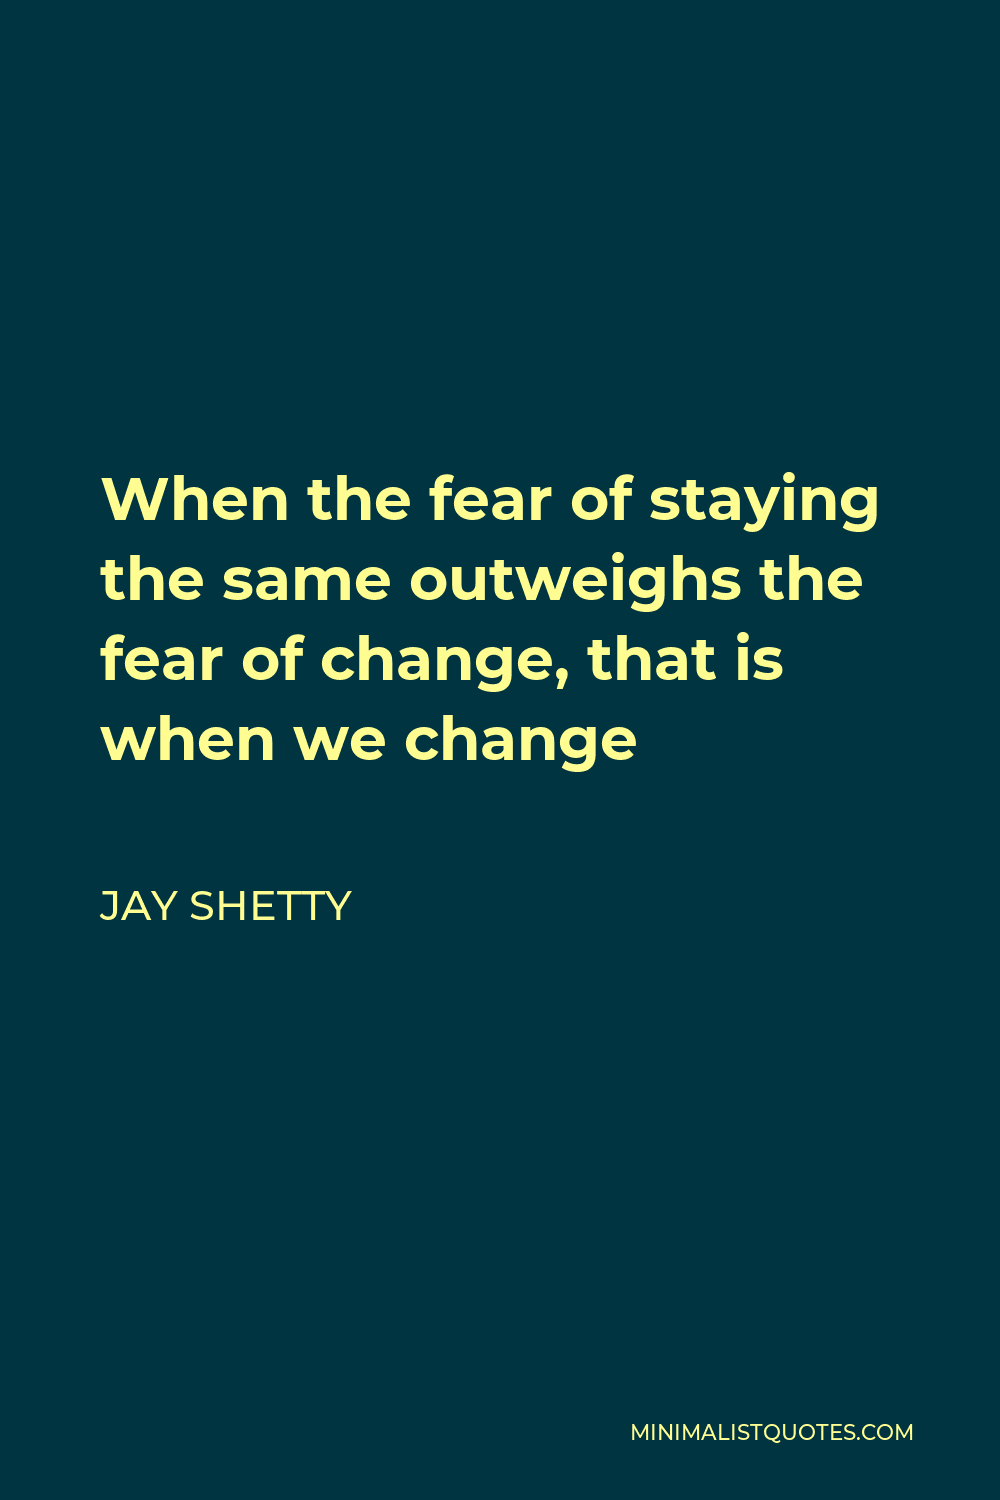 Jay Shetty Quote - When the fear of staying the same outweighs the fear of change, that is when we change